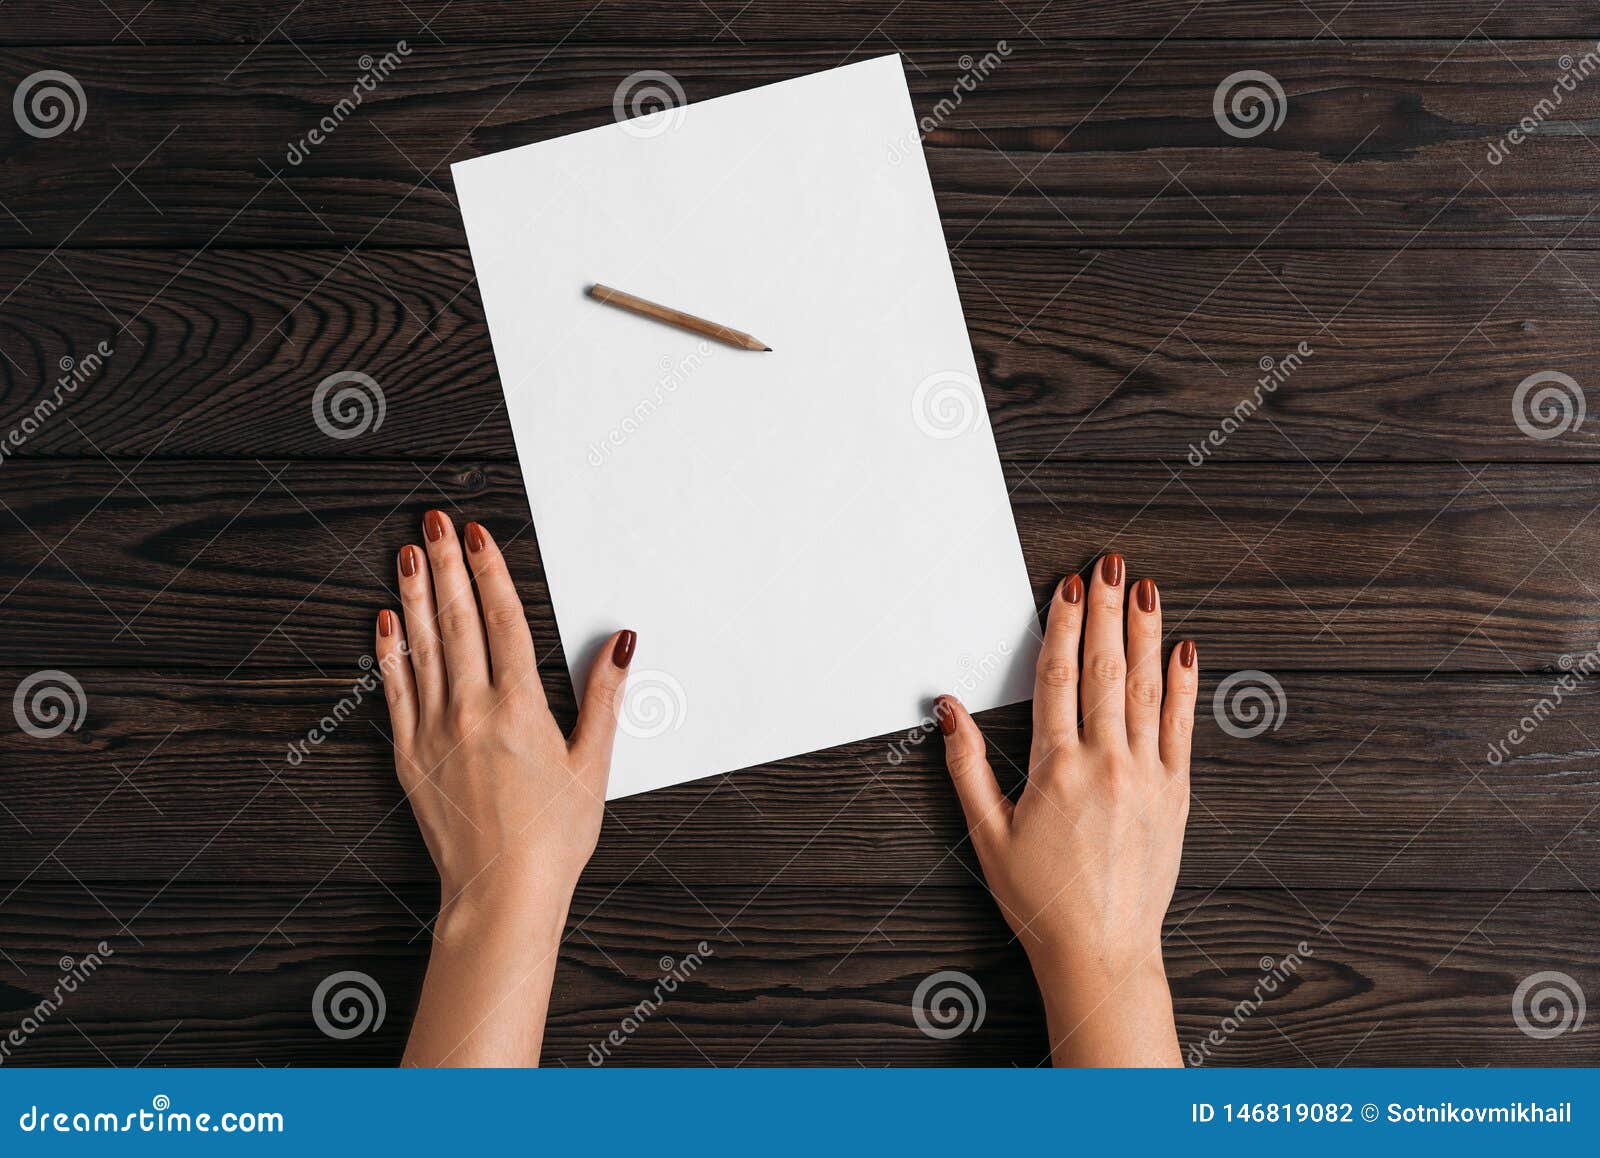 Top View of Women`s Hands, Ready To Write Something on an Empty Piece ...